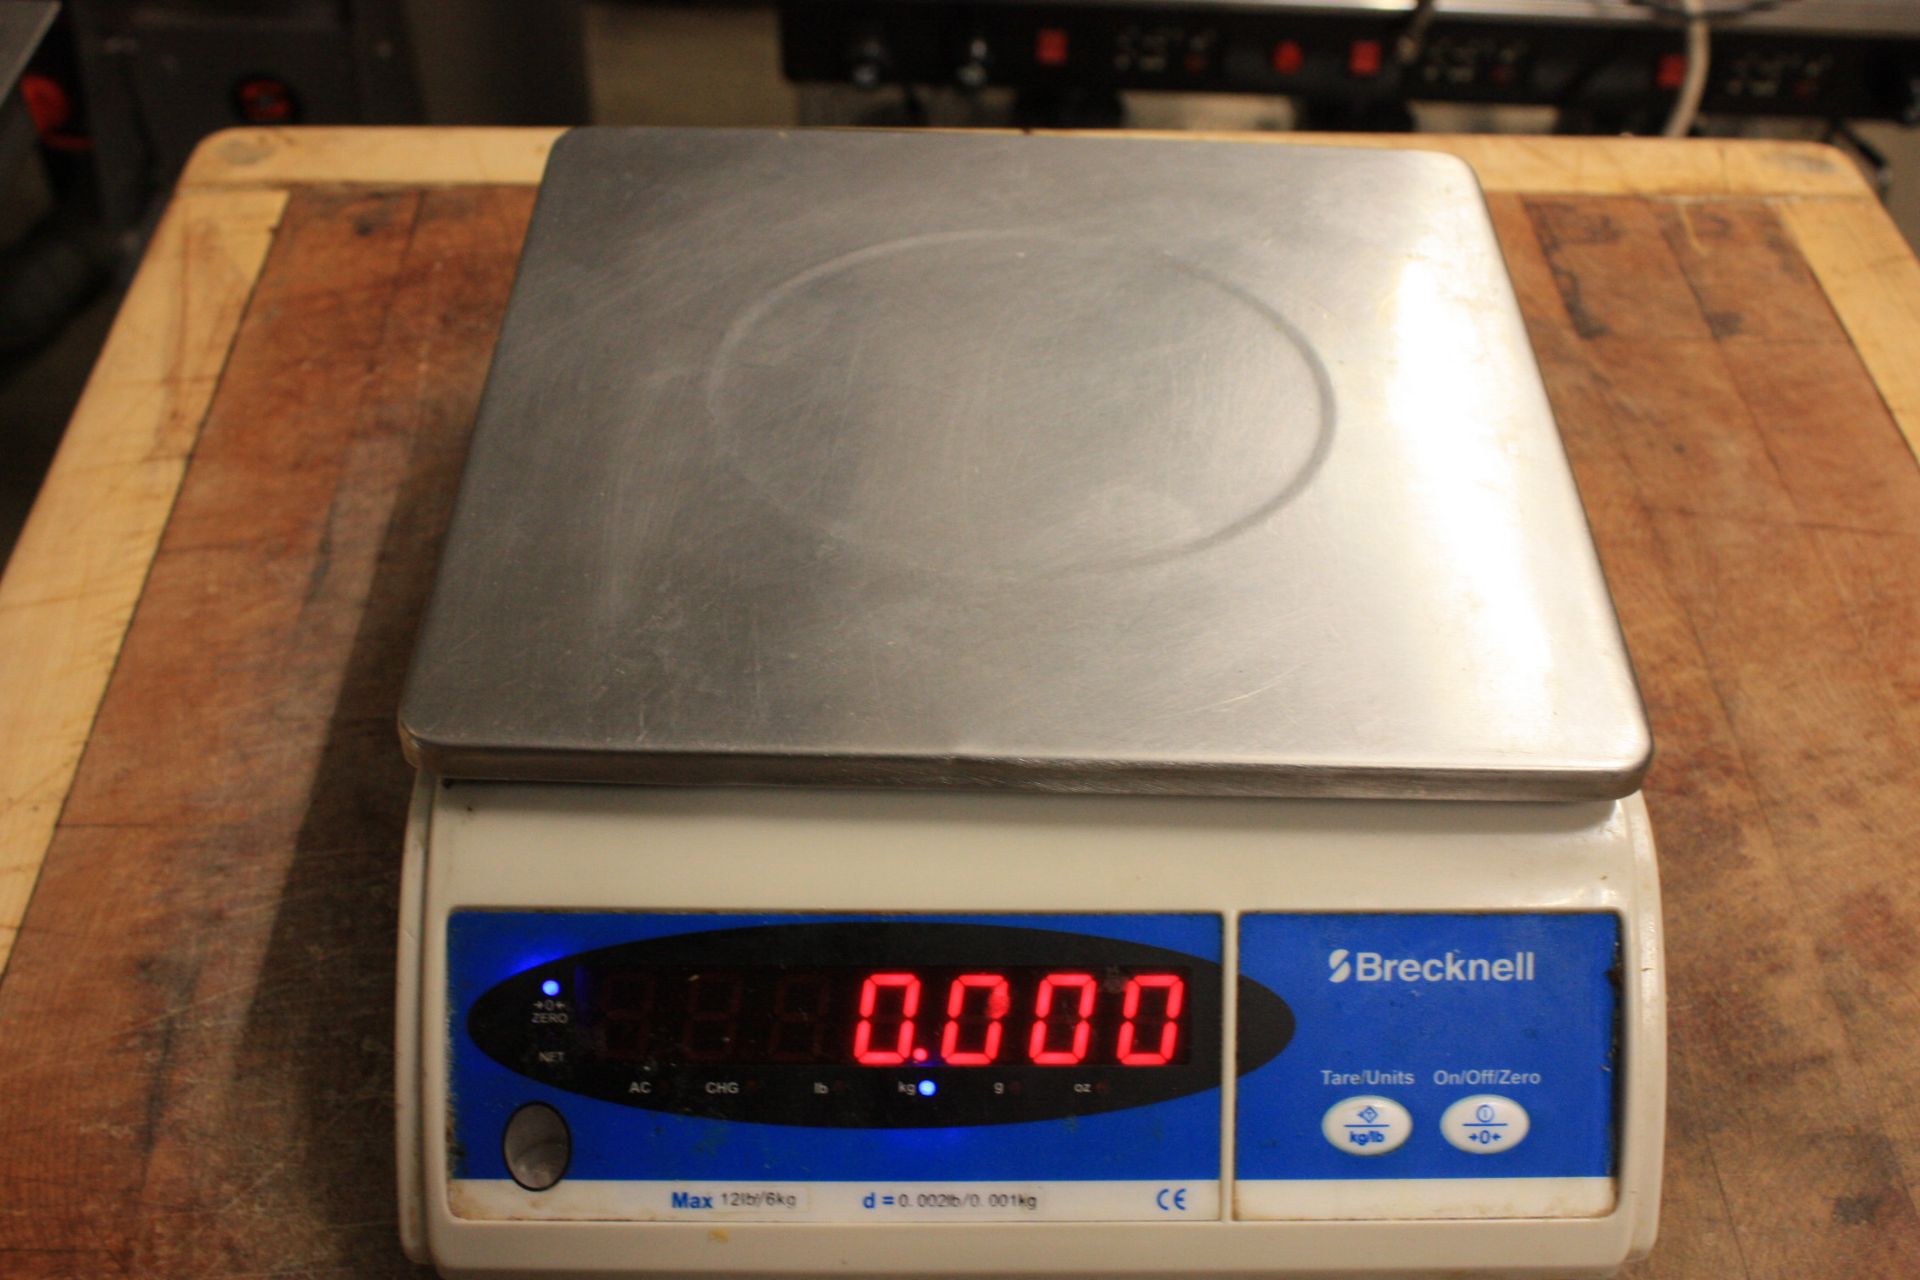 Brecknell electronic weighing scales. Weighs up to 6kg. Model number '40S'